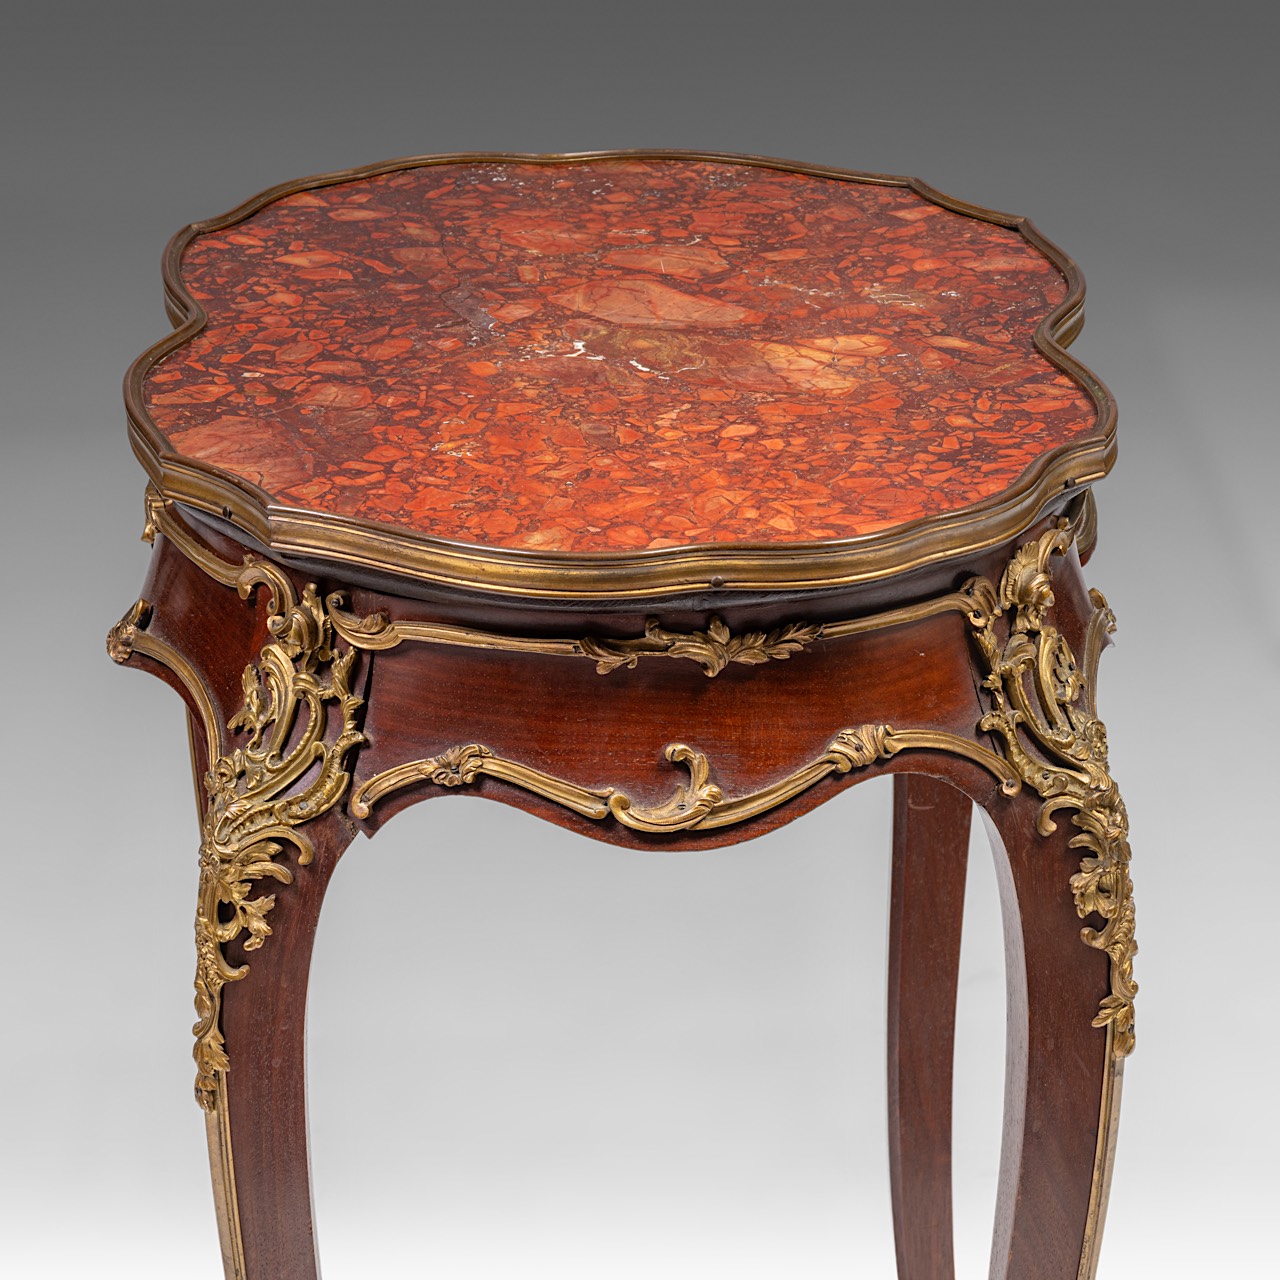 A mahogany marble-topped Louis XV (1723-1774) occasional table with gilt bronze mounts, H 77,5 cm - - Image 8 of 9